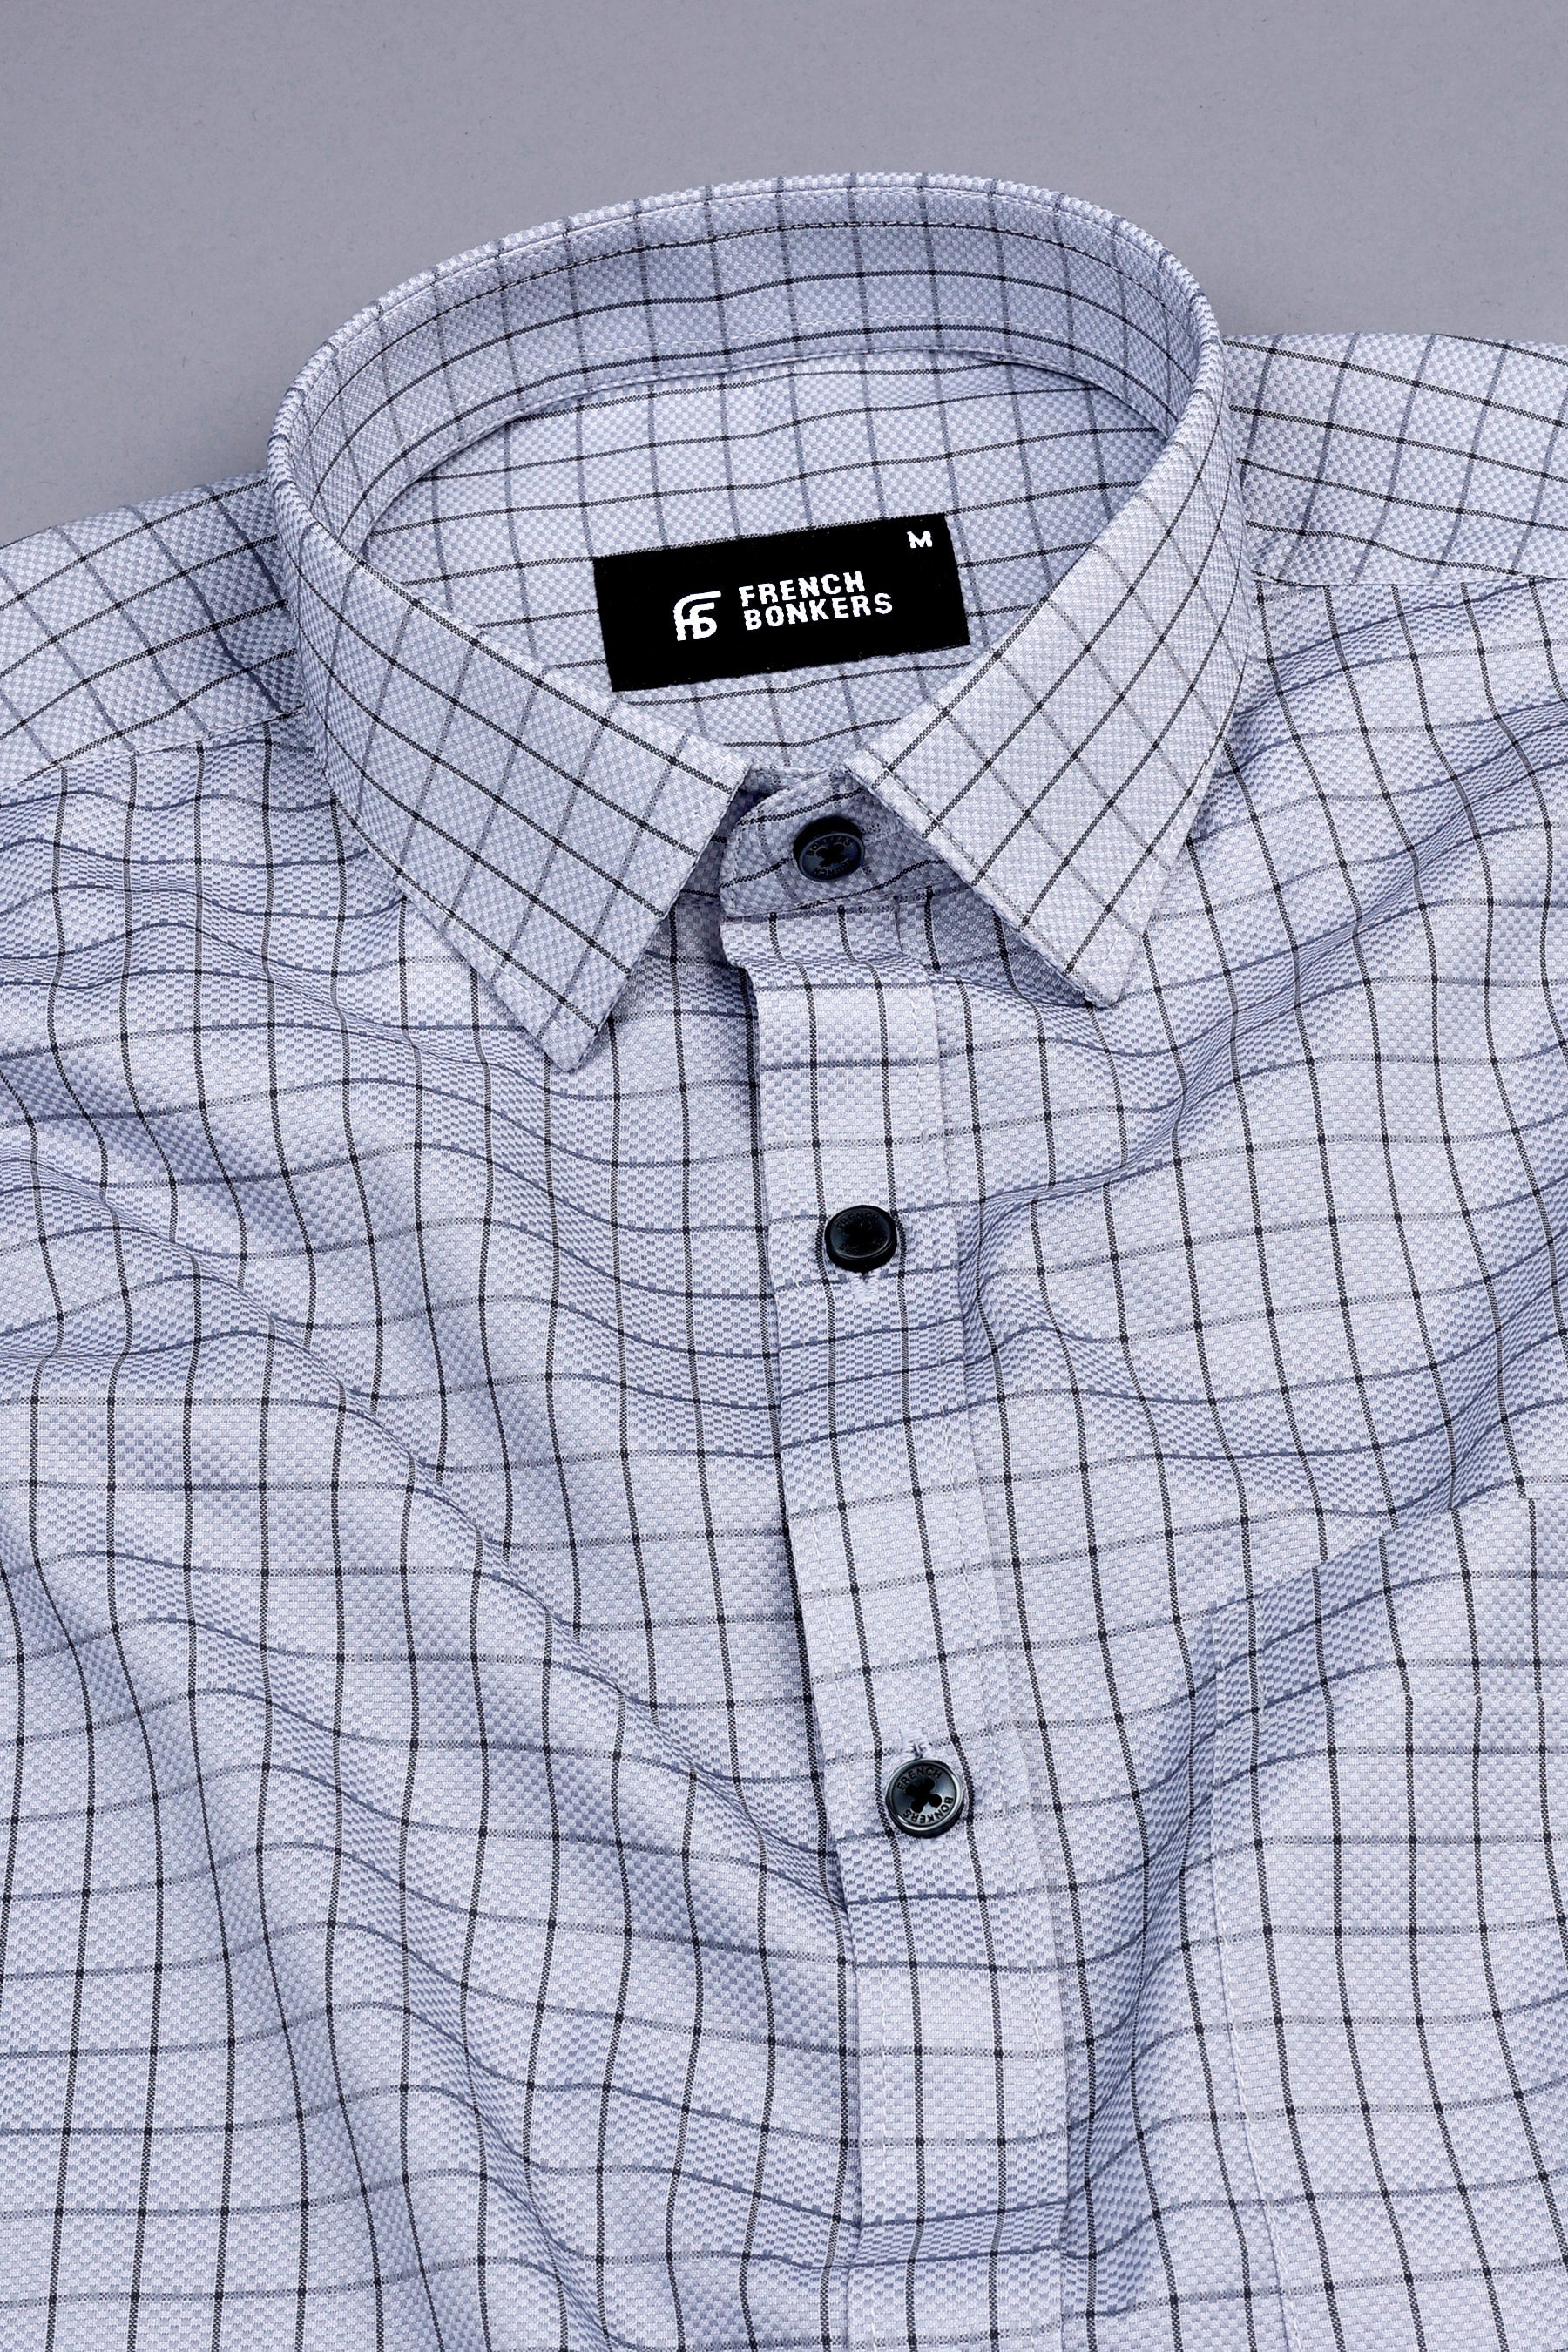 Charcoal grey with dark grey line check shirt